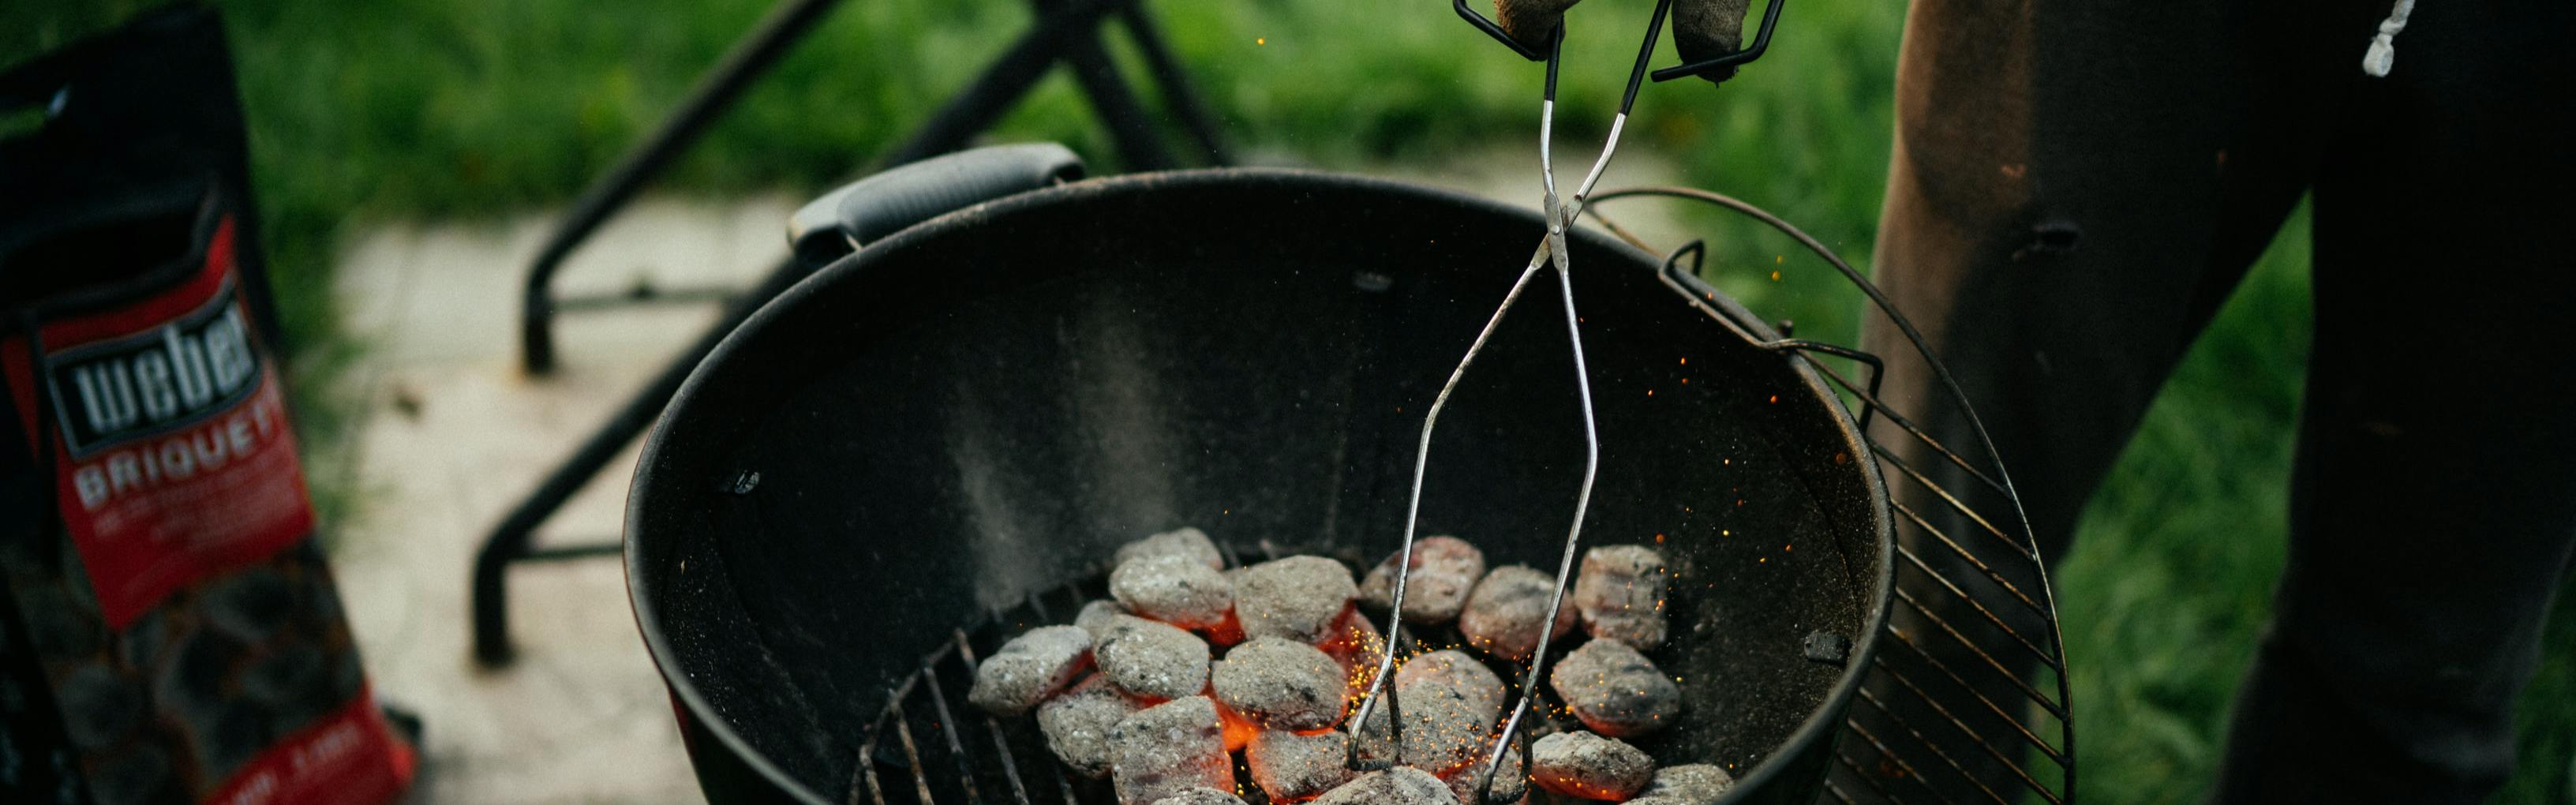 ejendom sej maksimere An Expert Guide to Weber Grill Accessories | Curated.com